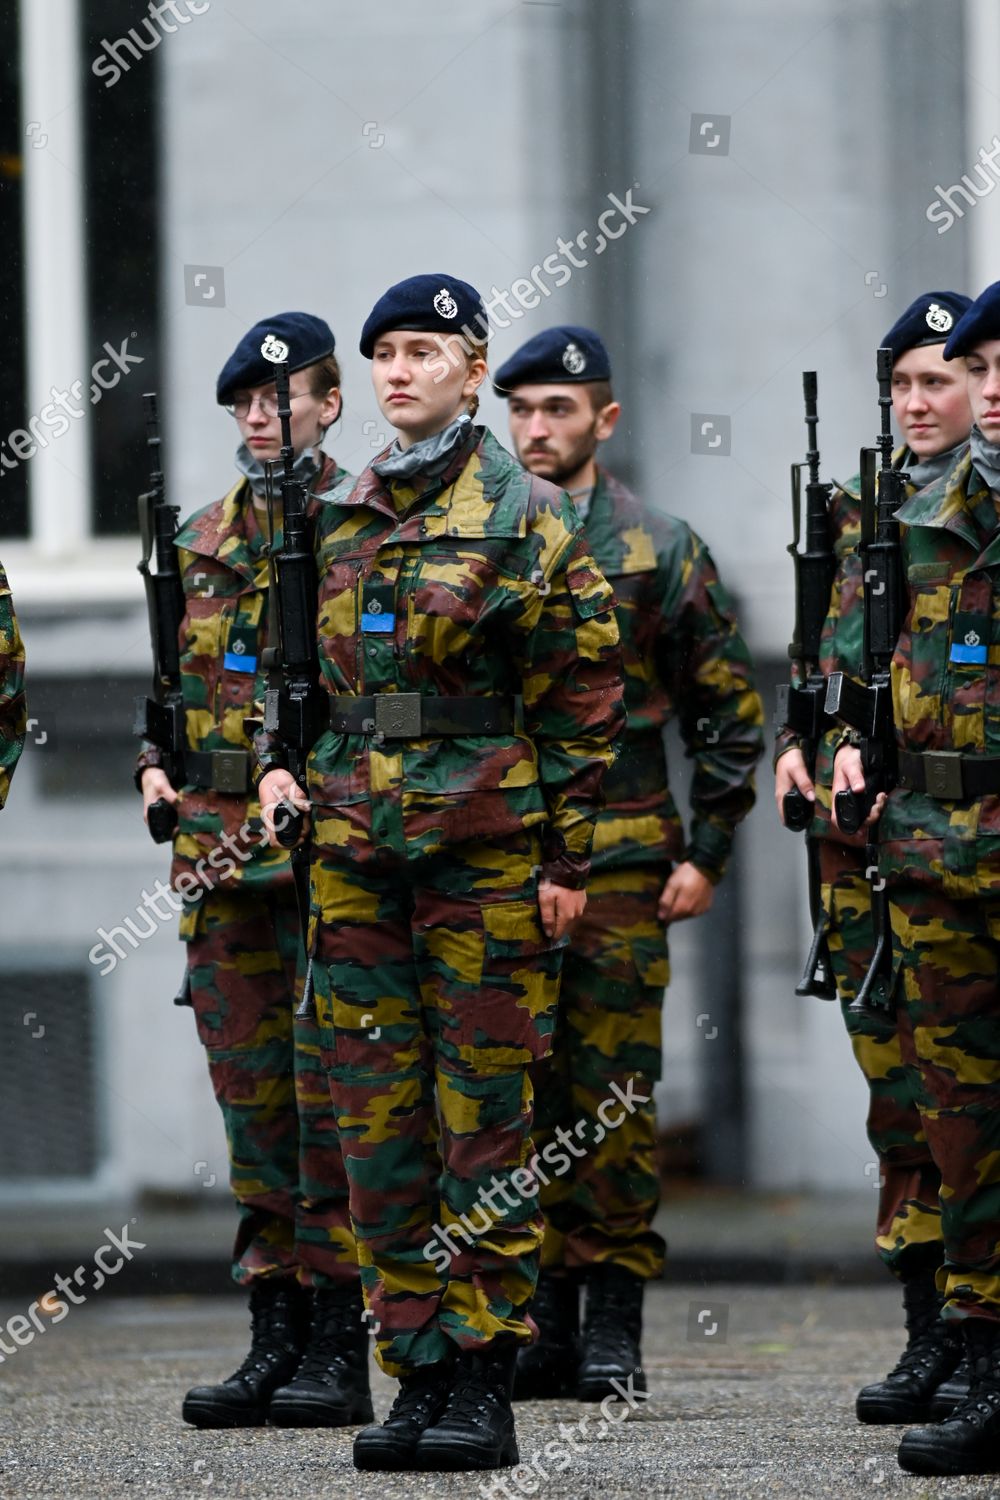 CASA REAL BELGA - Página 27 Belgian-royals-attend-ceremony-for-the-presentation-of-the-blue-berets-royal-military-academy-erm-brussels-belgium-shutterstock-editorial-10790437as